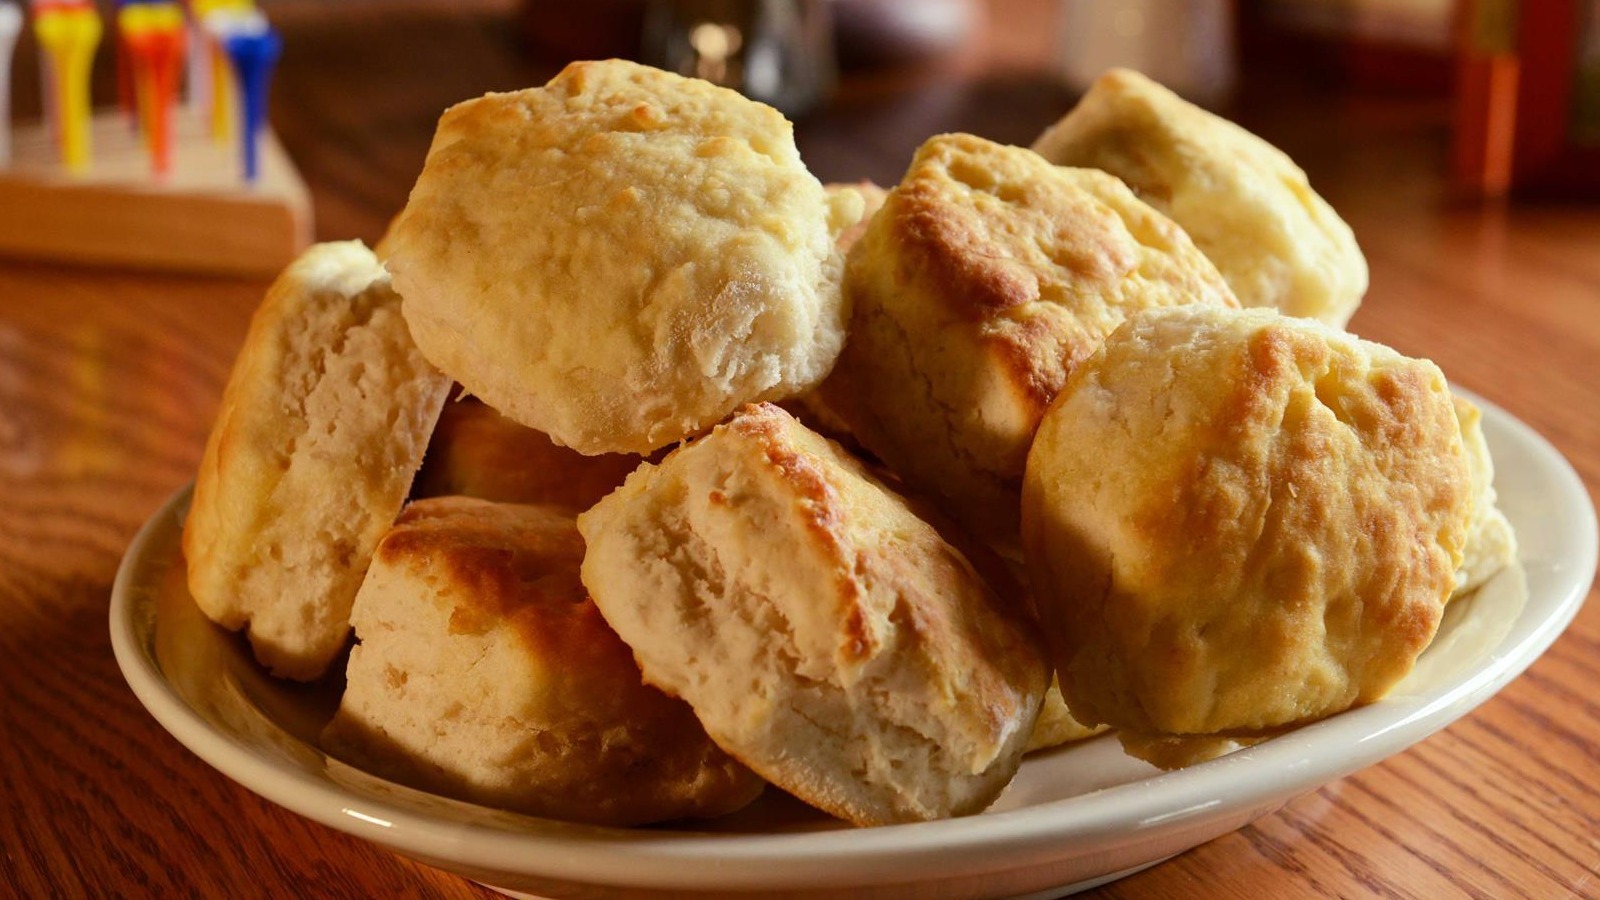 The Cracker Barrel Ordering Tip If You Want Your Bread ASAP – The Daily Meal